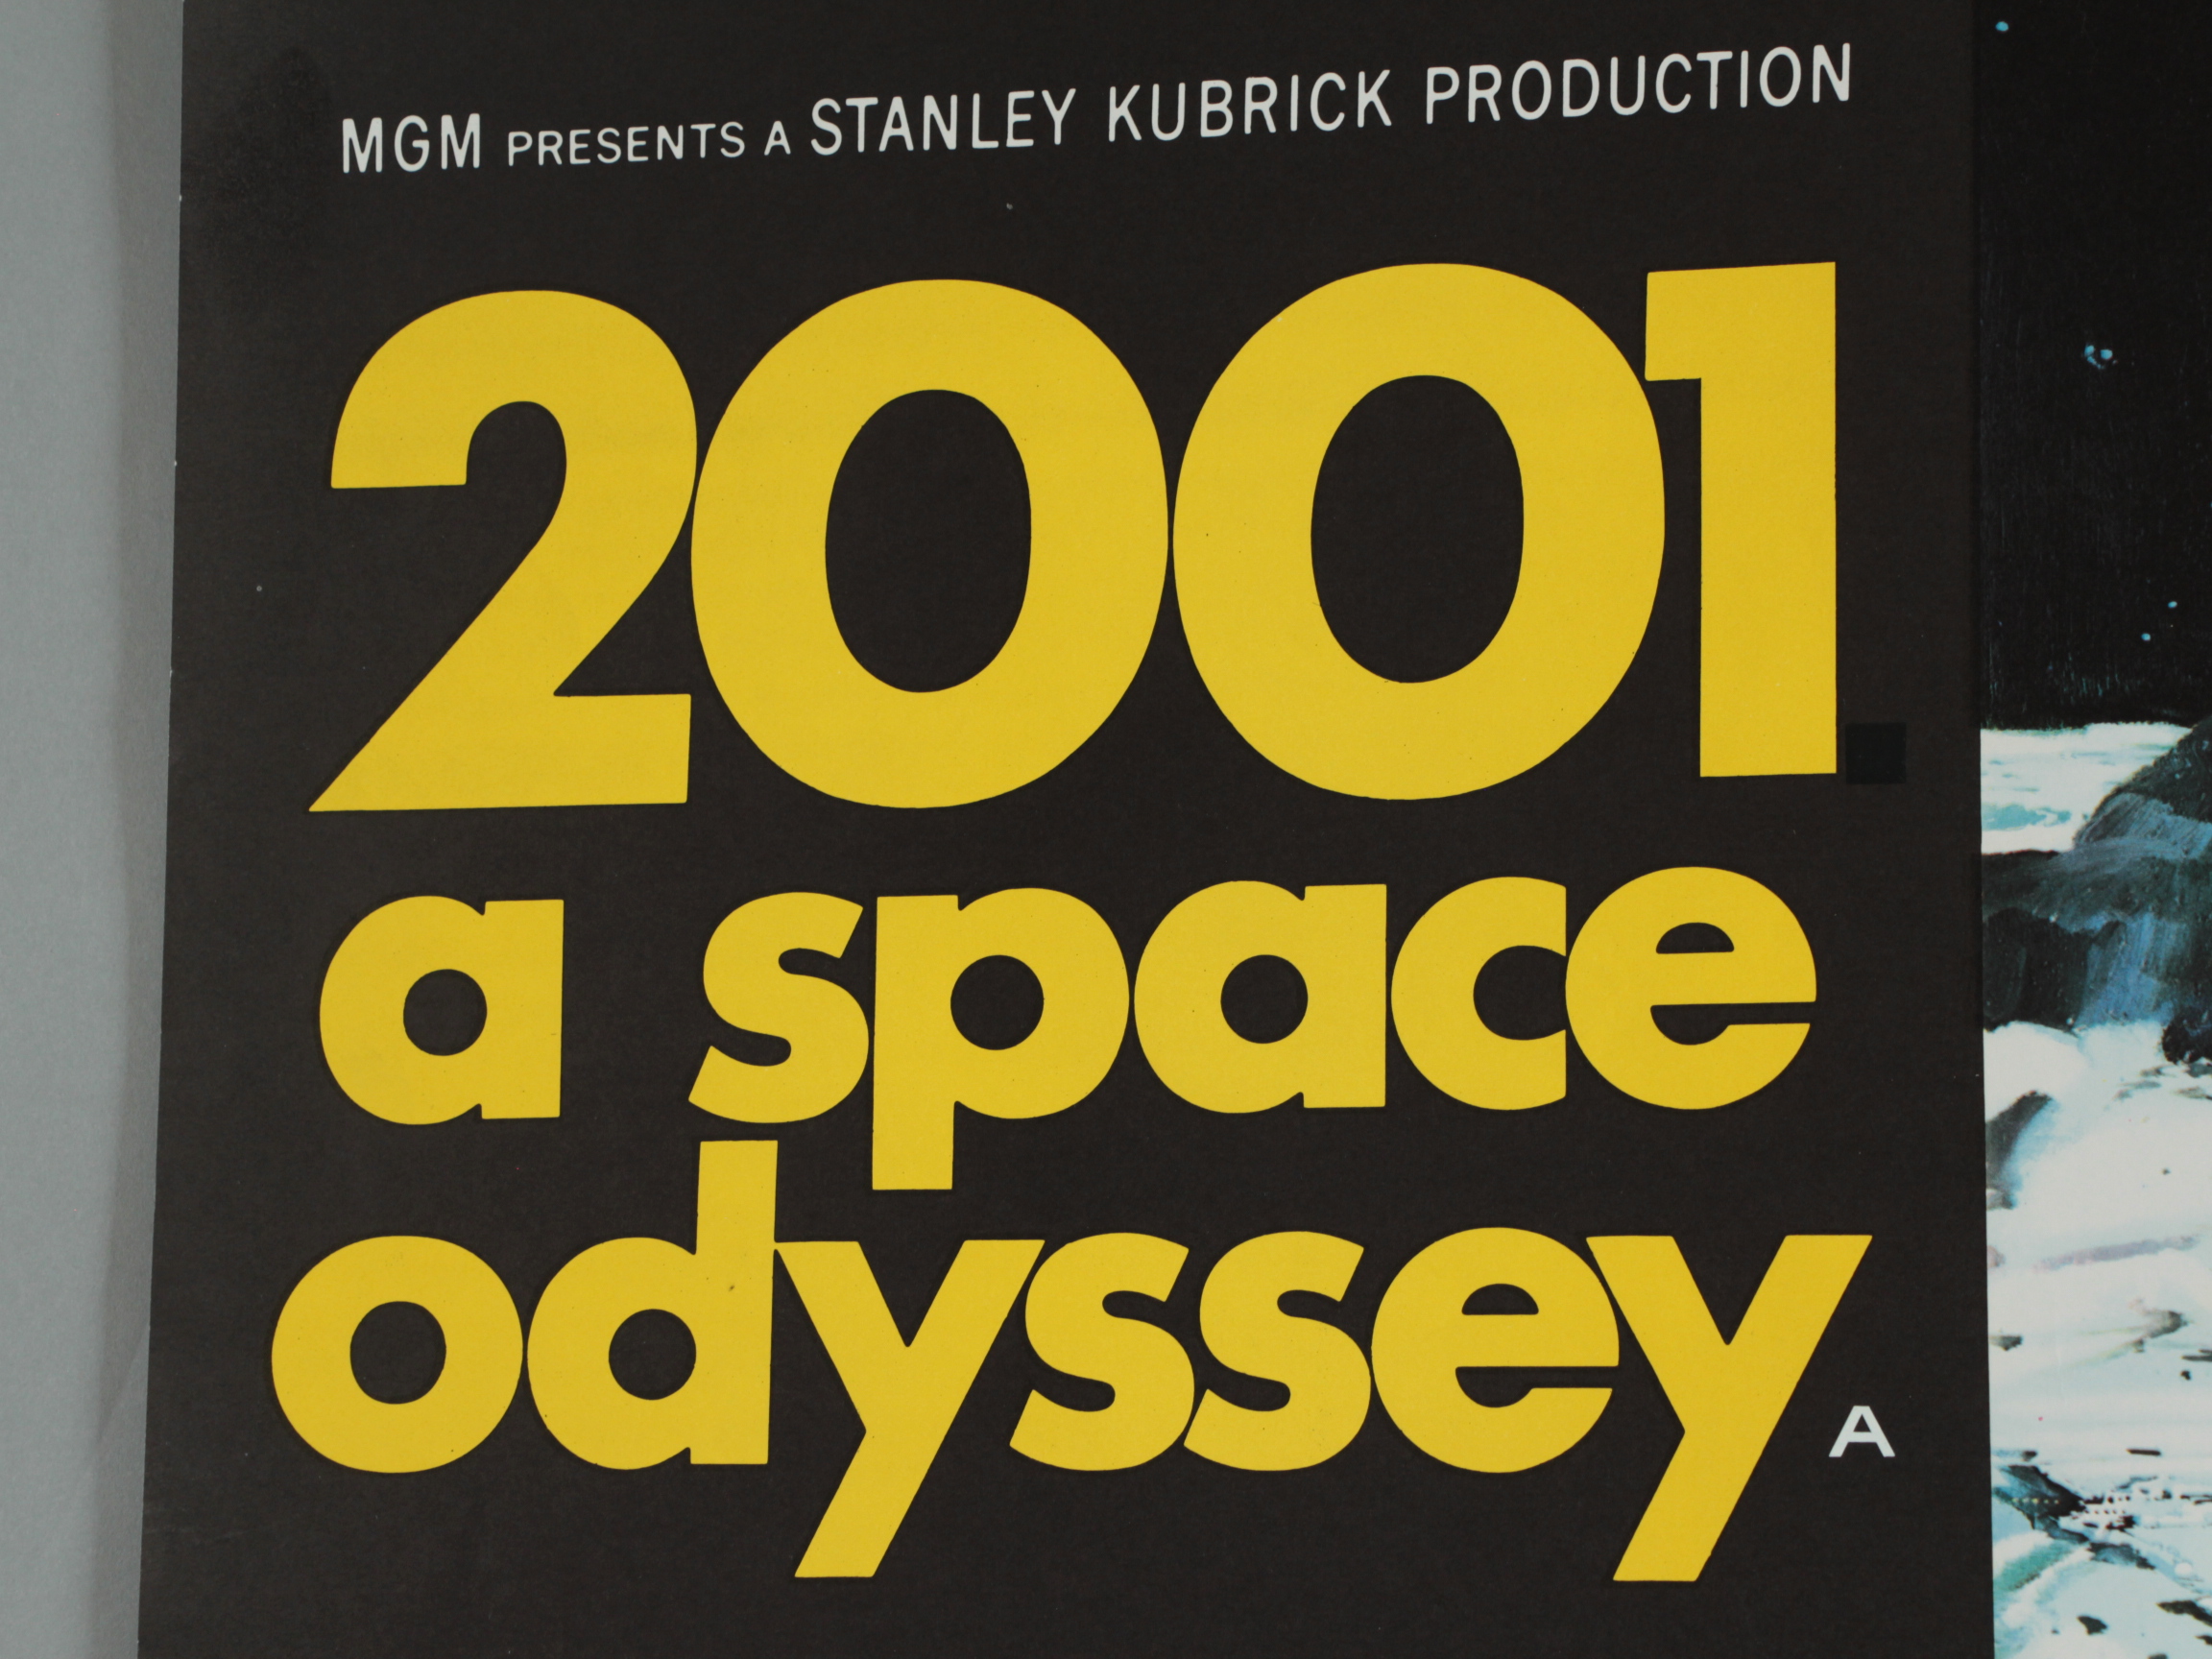 2001 A SPACE ODYSSEY 1968 first release British Quad film poster directed by Stanley Kubrick - Image 6 of 9